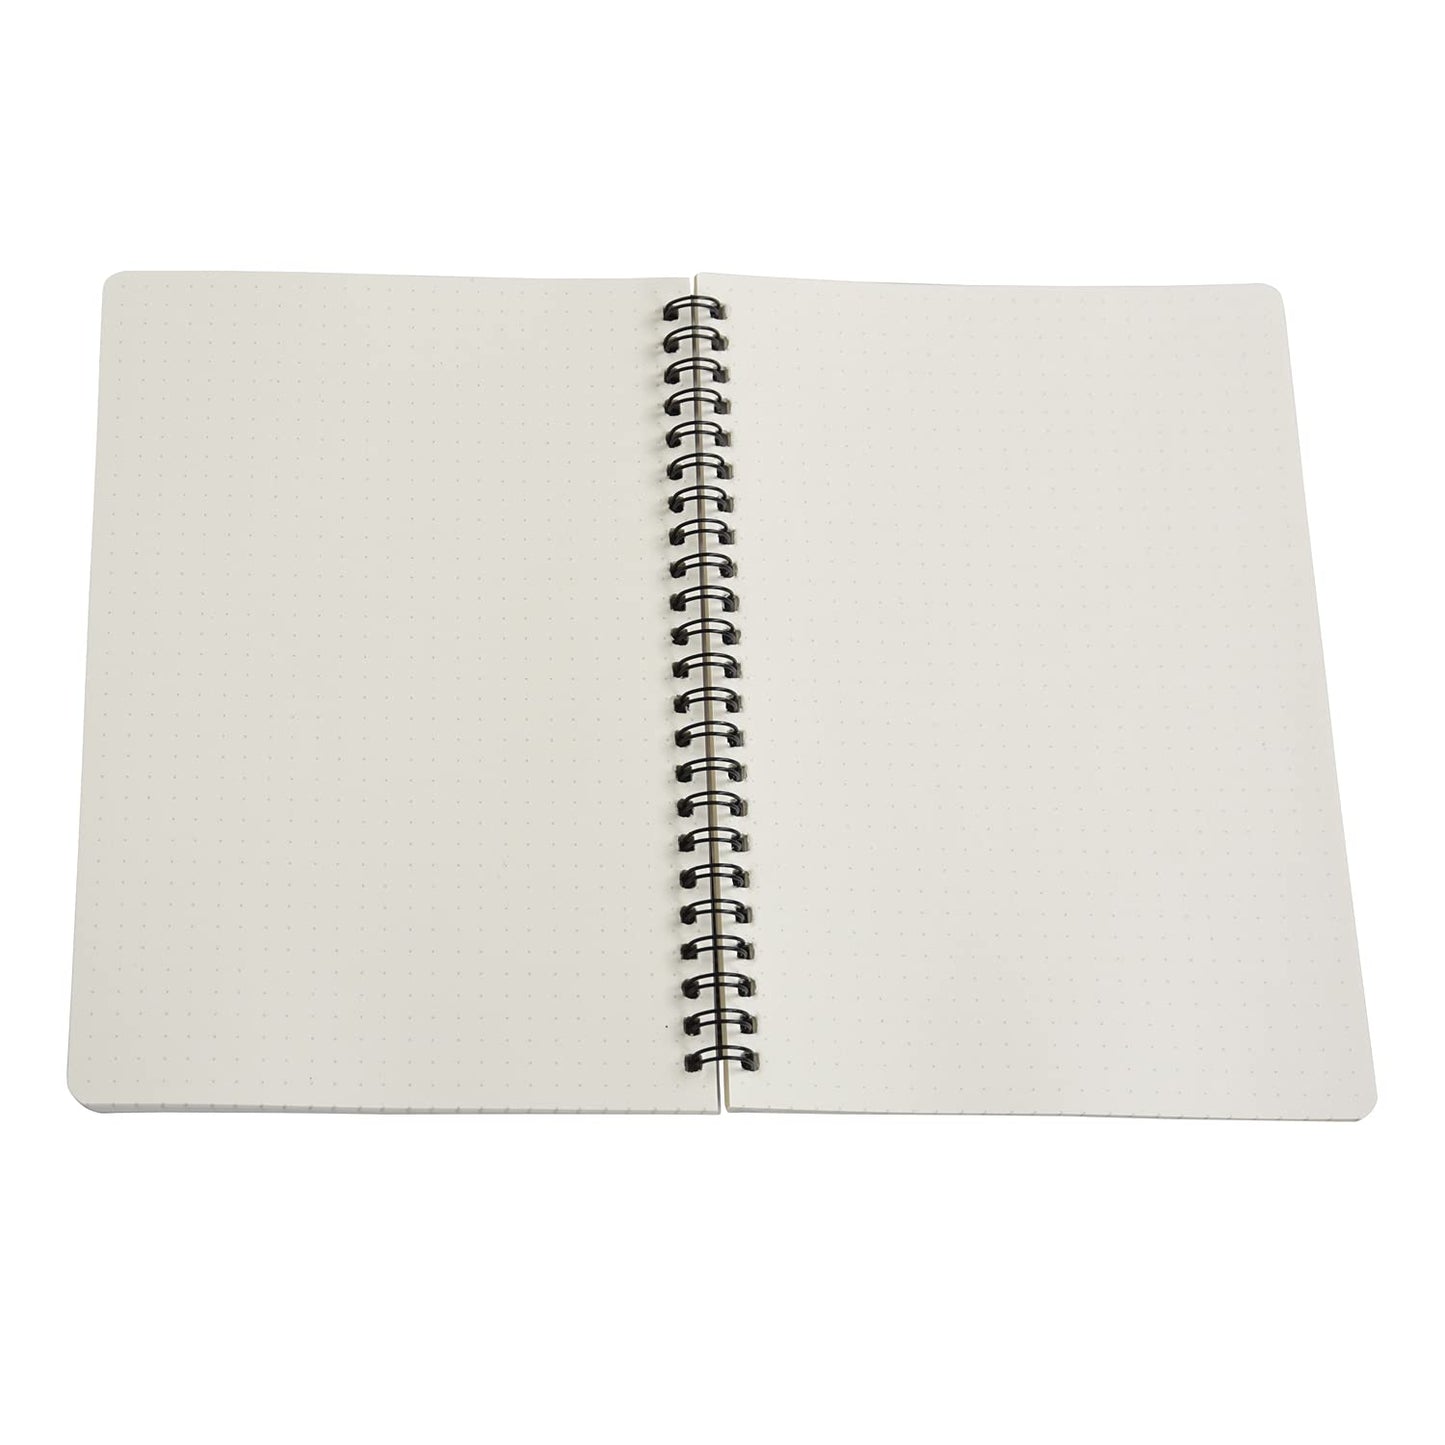 Pack of 9, SMILE Spiral Wiro Notebook -  Dot Grid (Navratri Special)